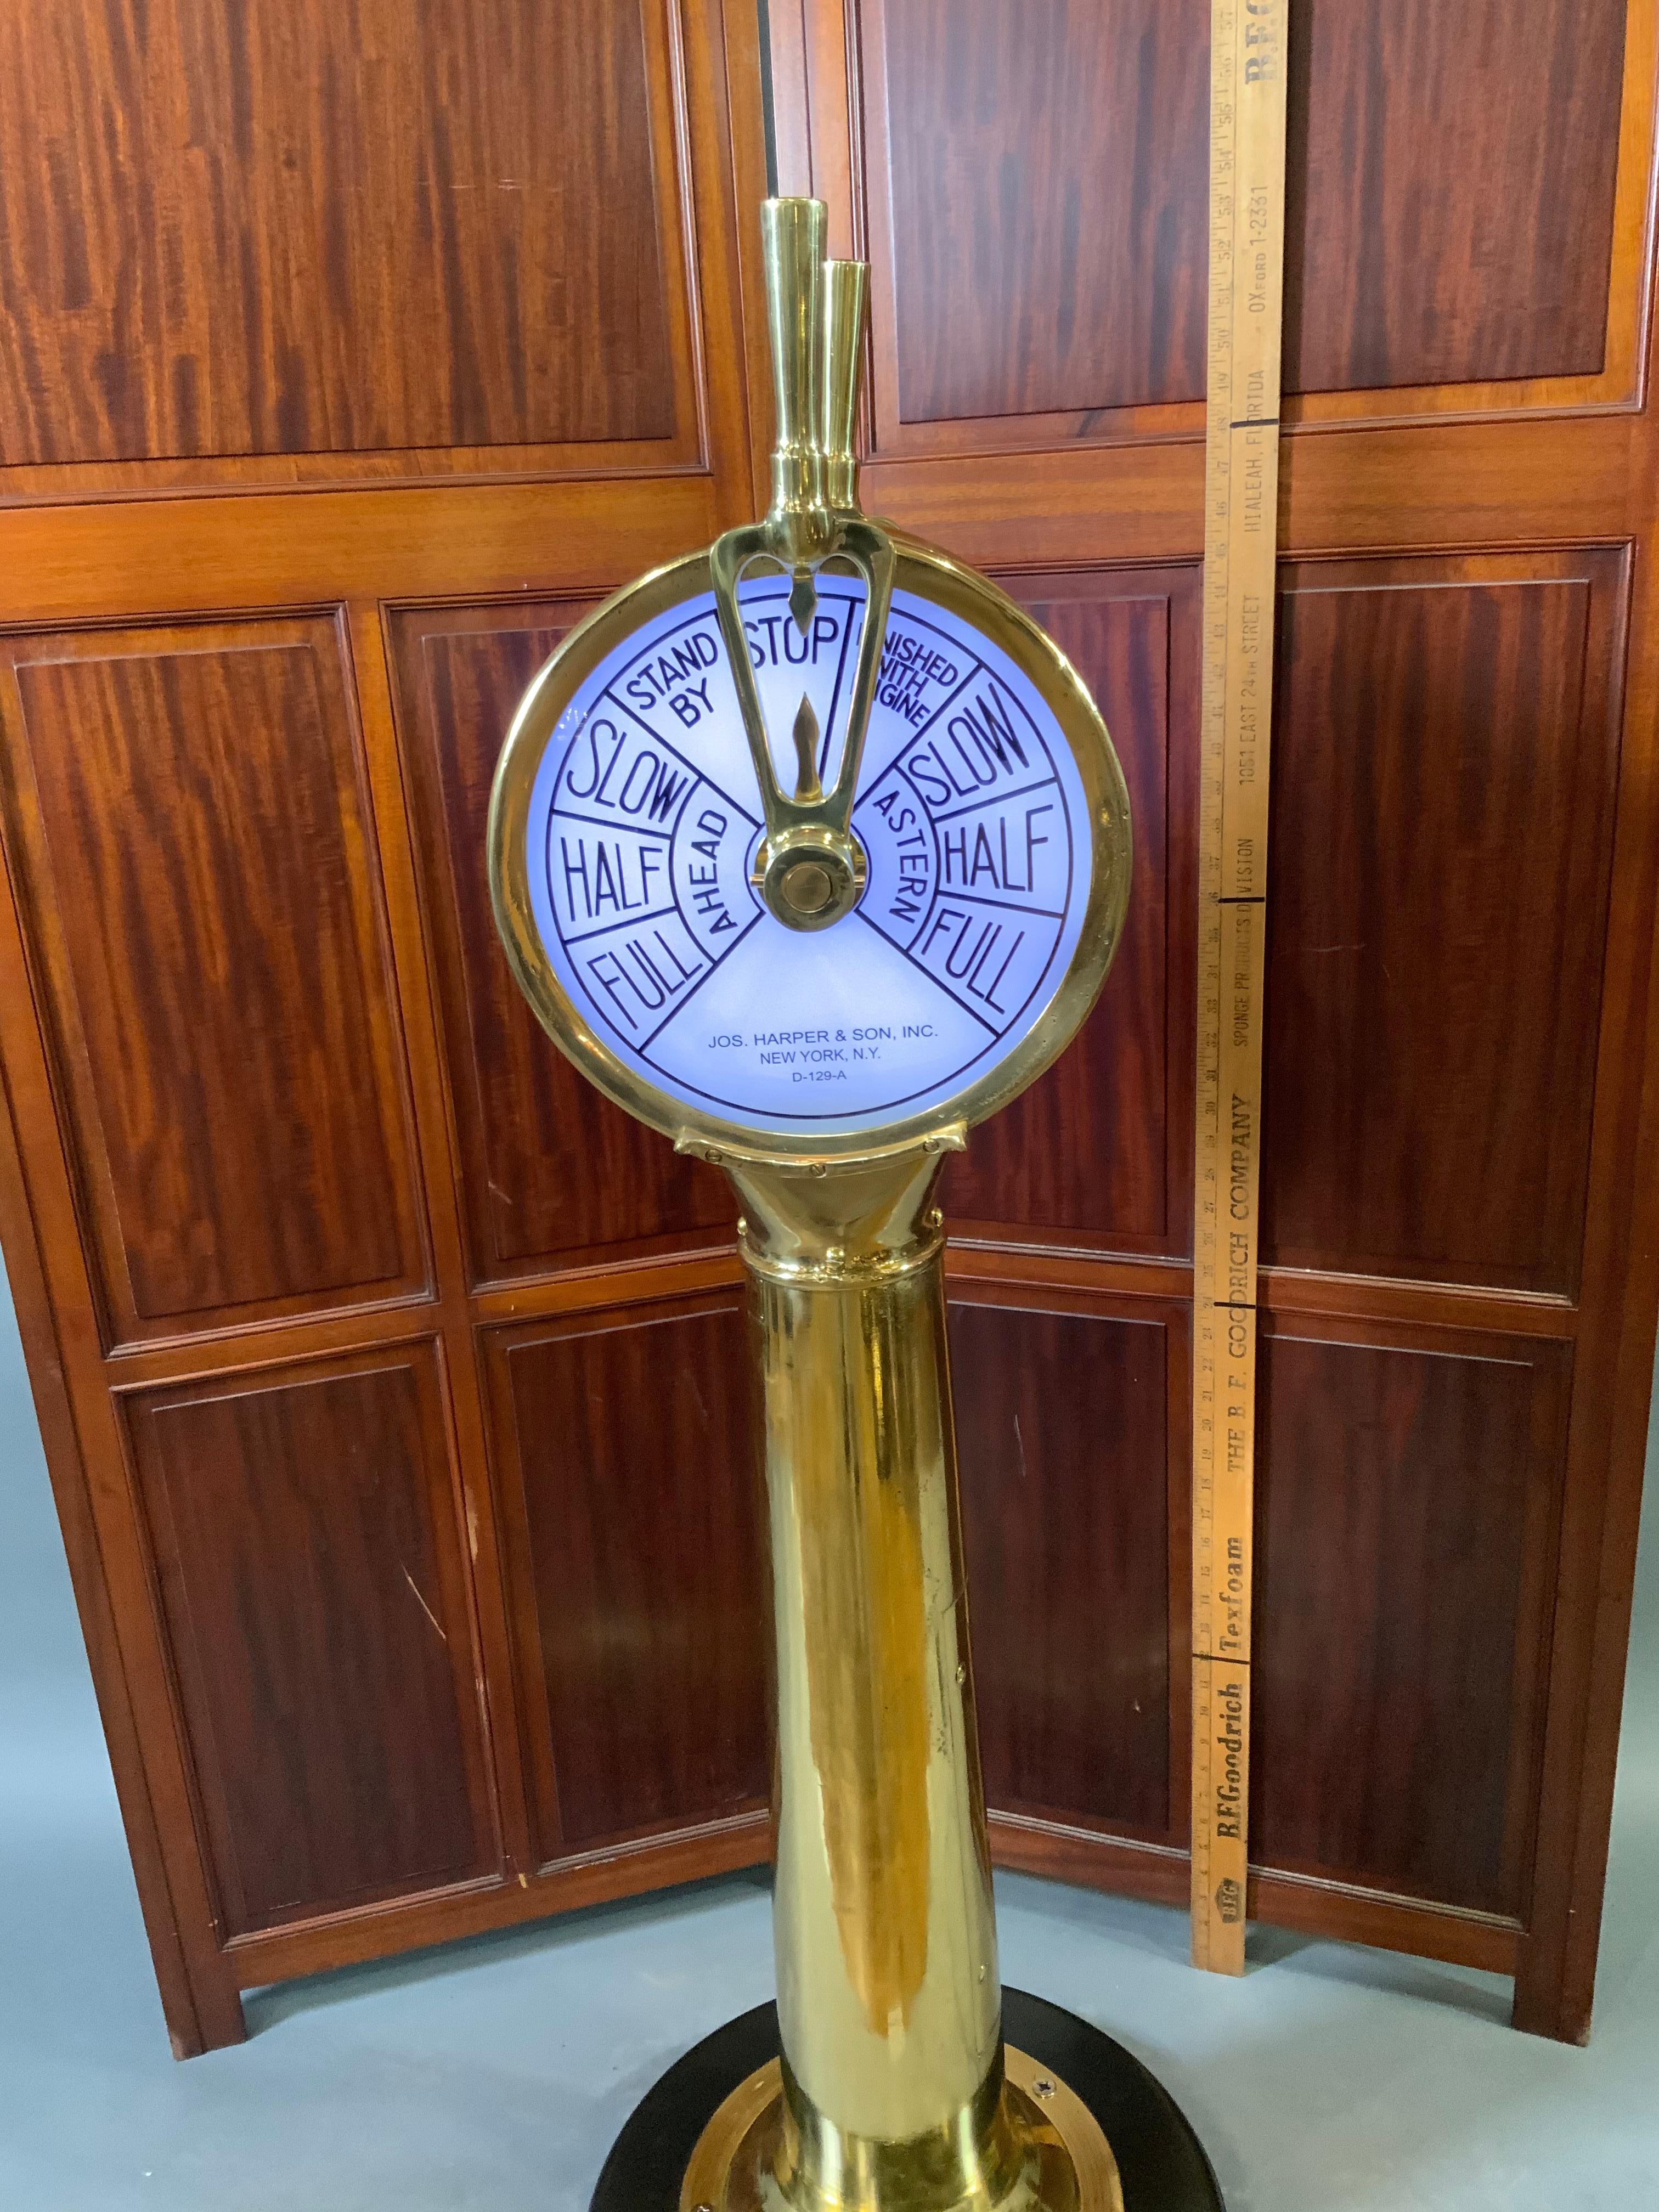 This is a meticulously polished and lacquered telegraph that has its bells ringing, is wired with lighting, and is mounted to a thick wood base. Circa 1940. Dimensions: H: 47